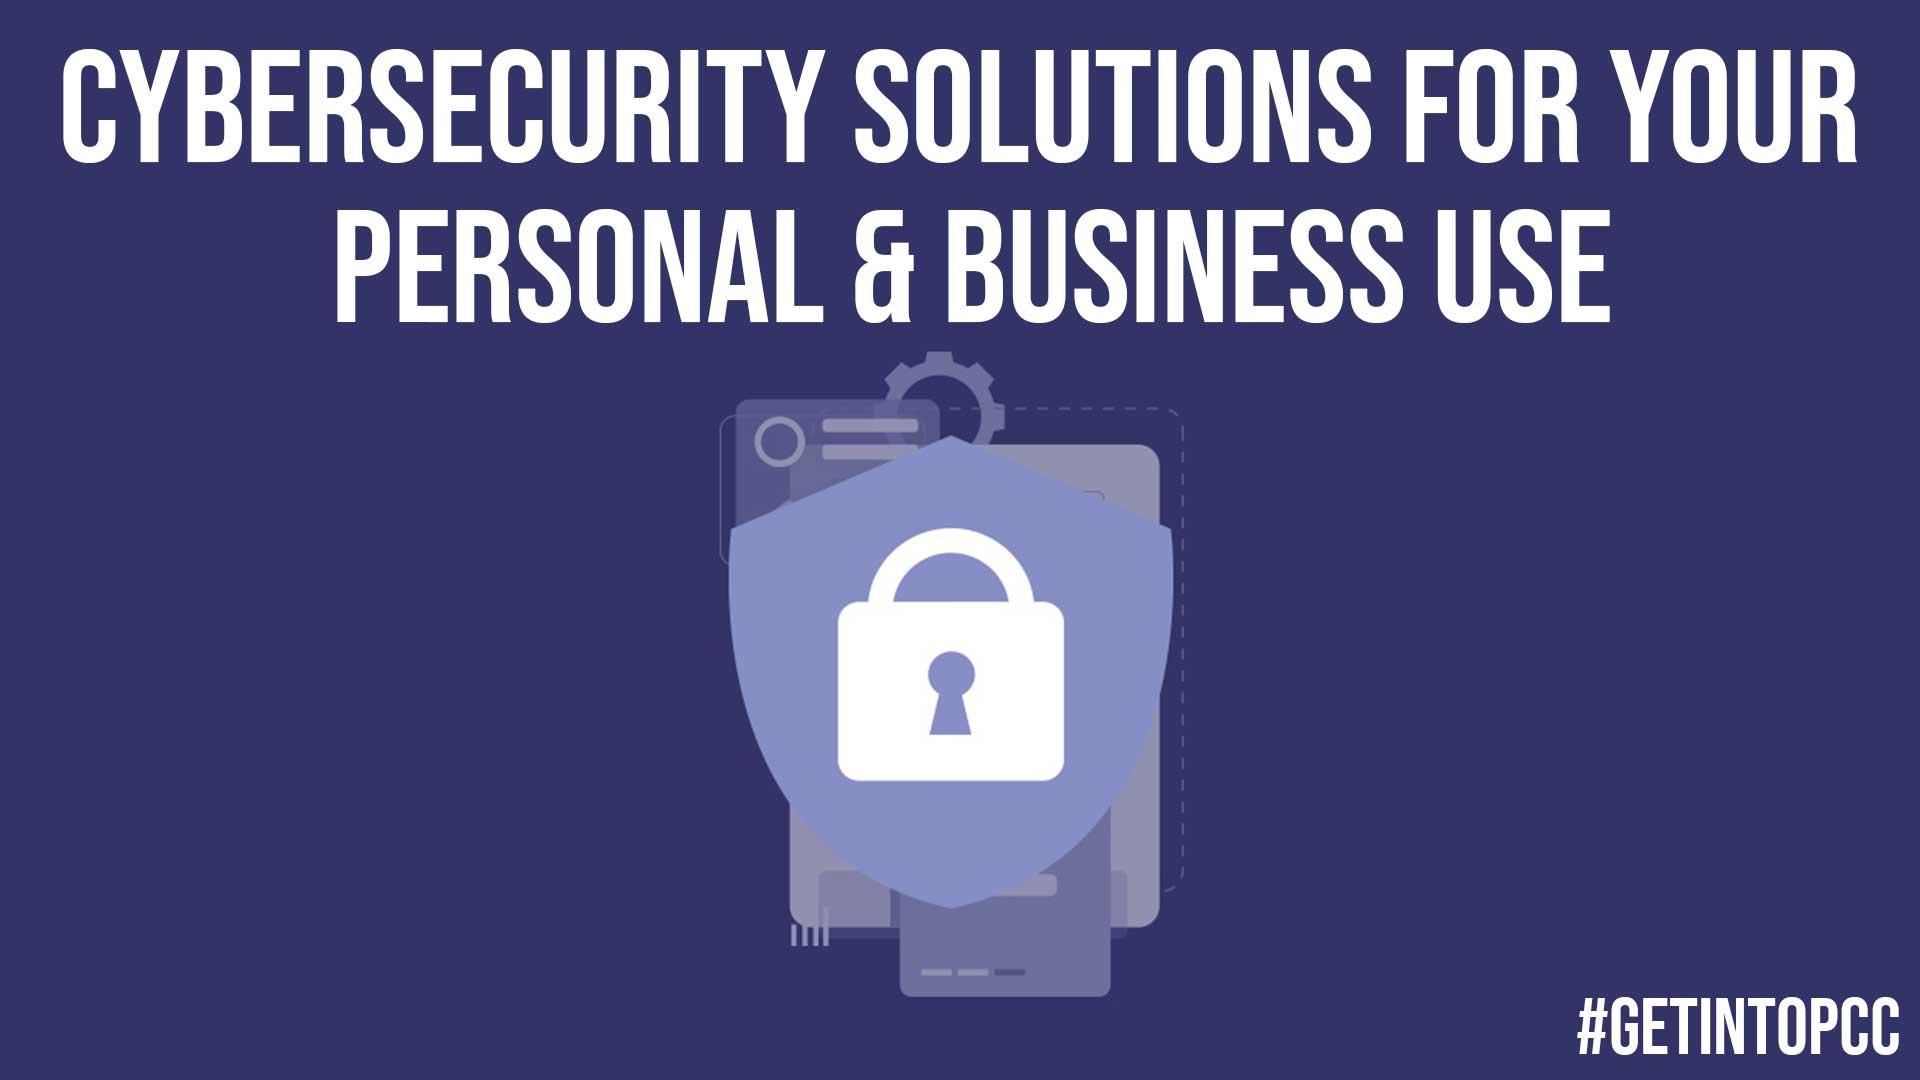 Cybersecurity Solutions for Your Personal Business Use